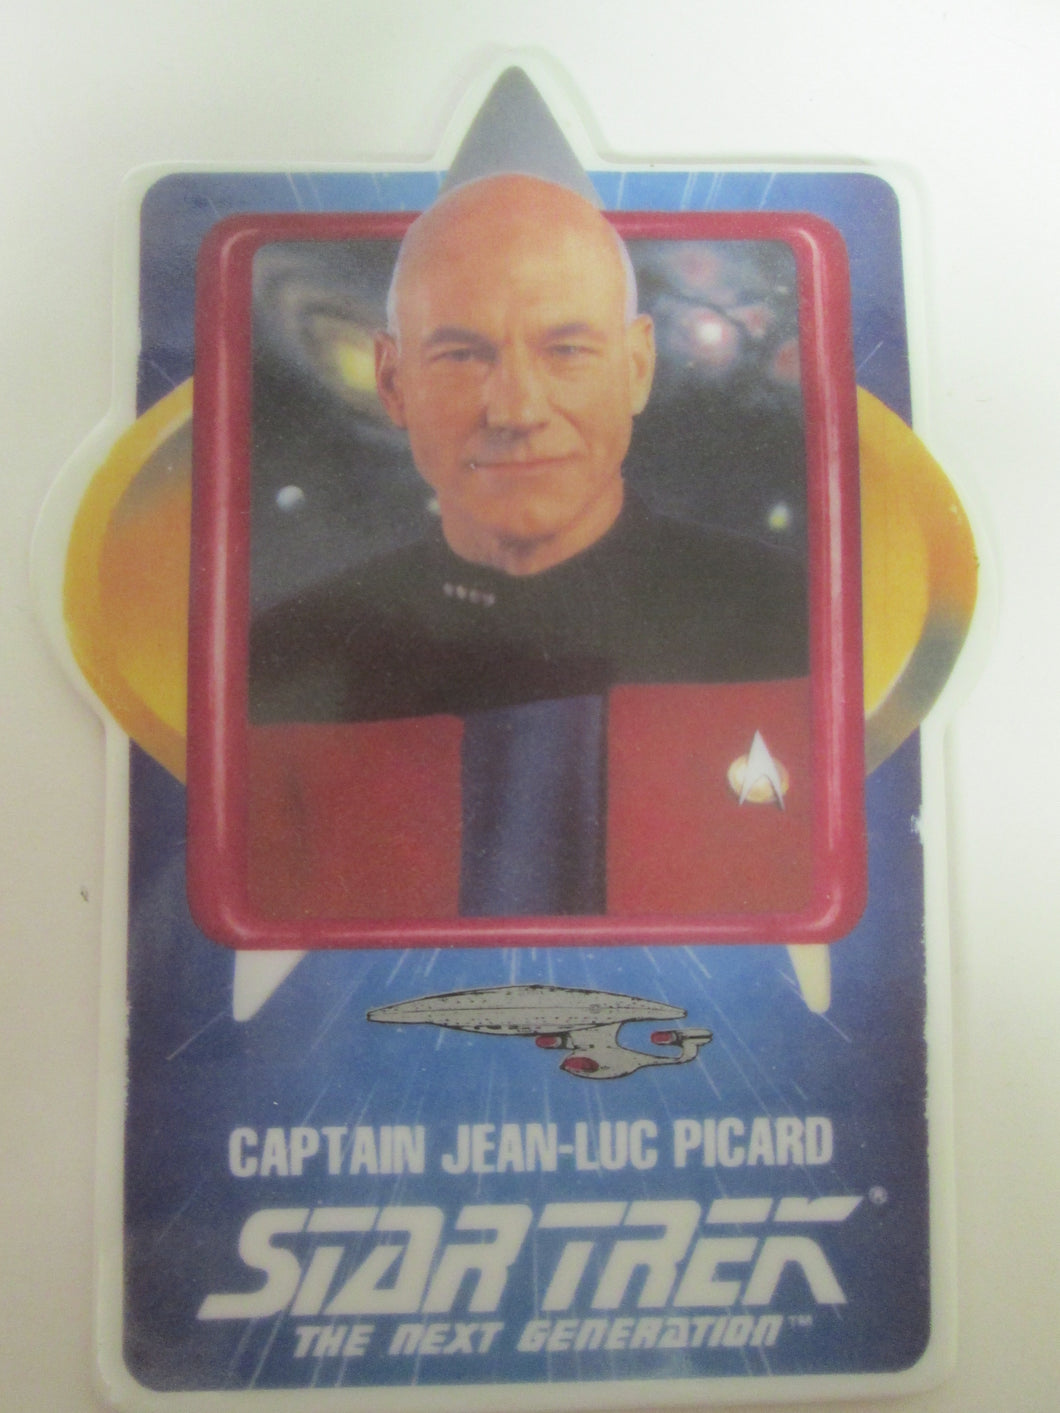 Star Trek The Next Generation Captain Jean-Luc Picard Collector Ceramic Card Plate (1992)